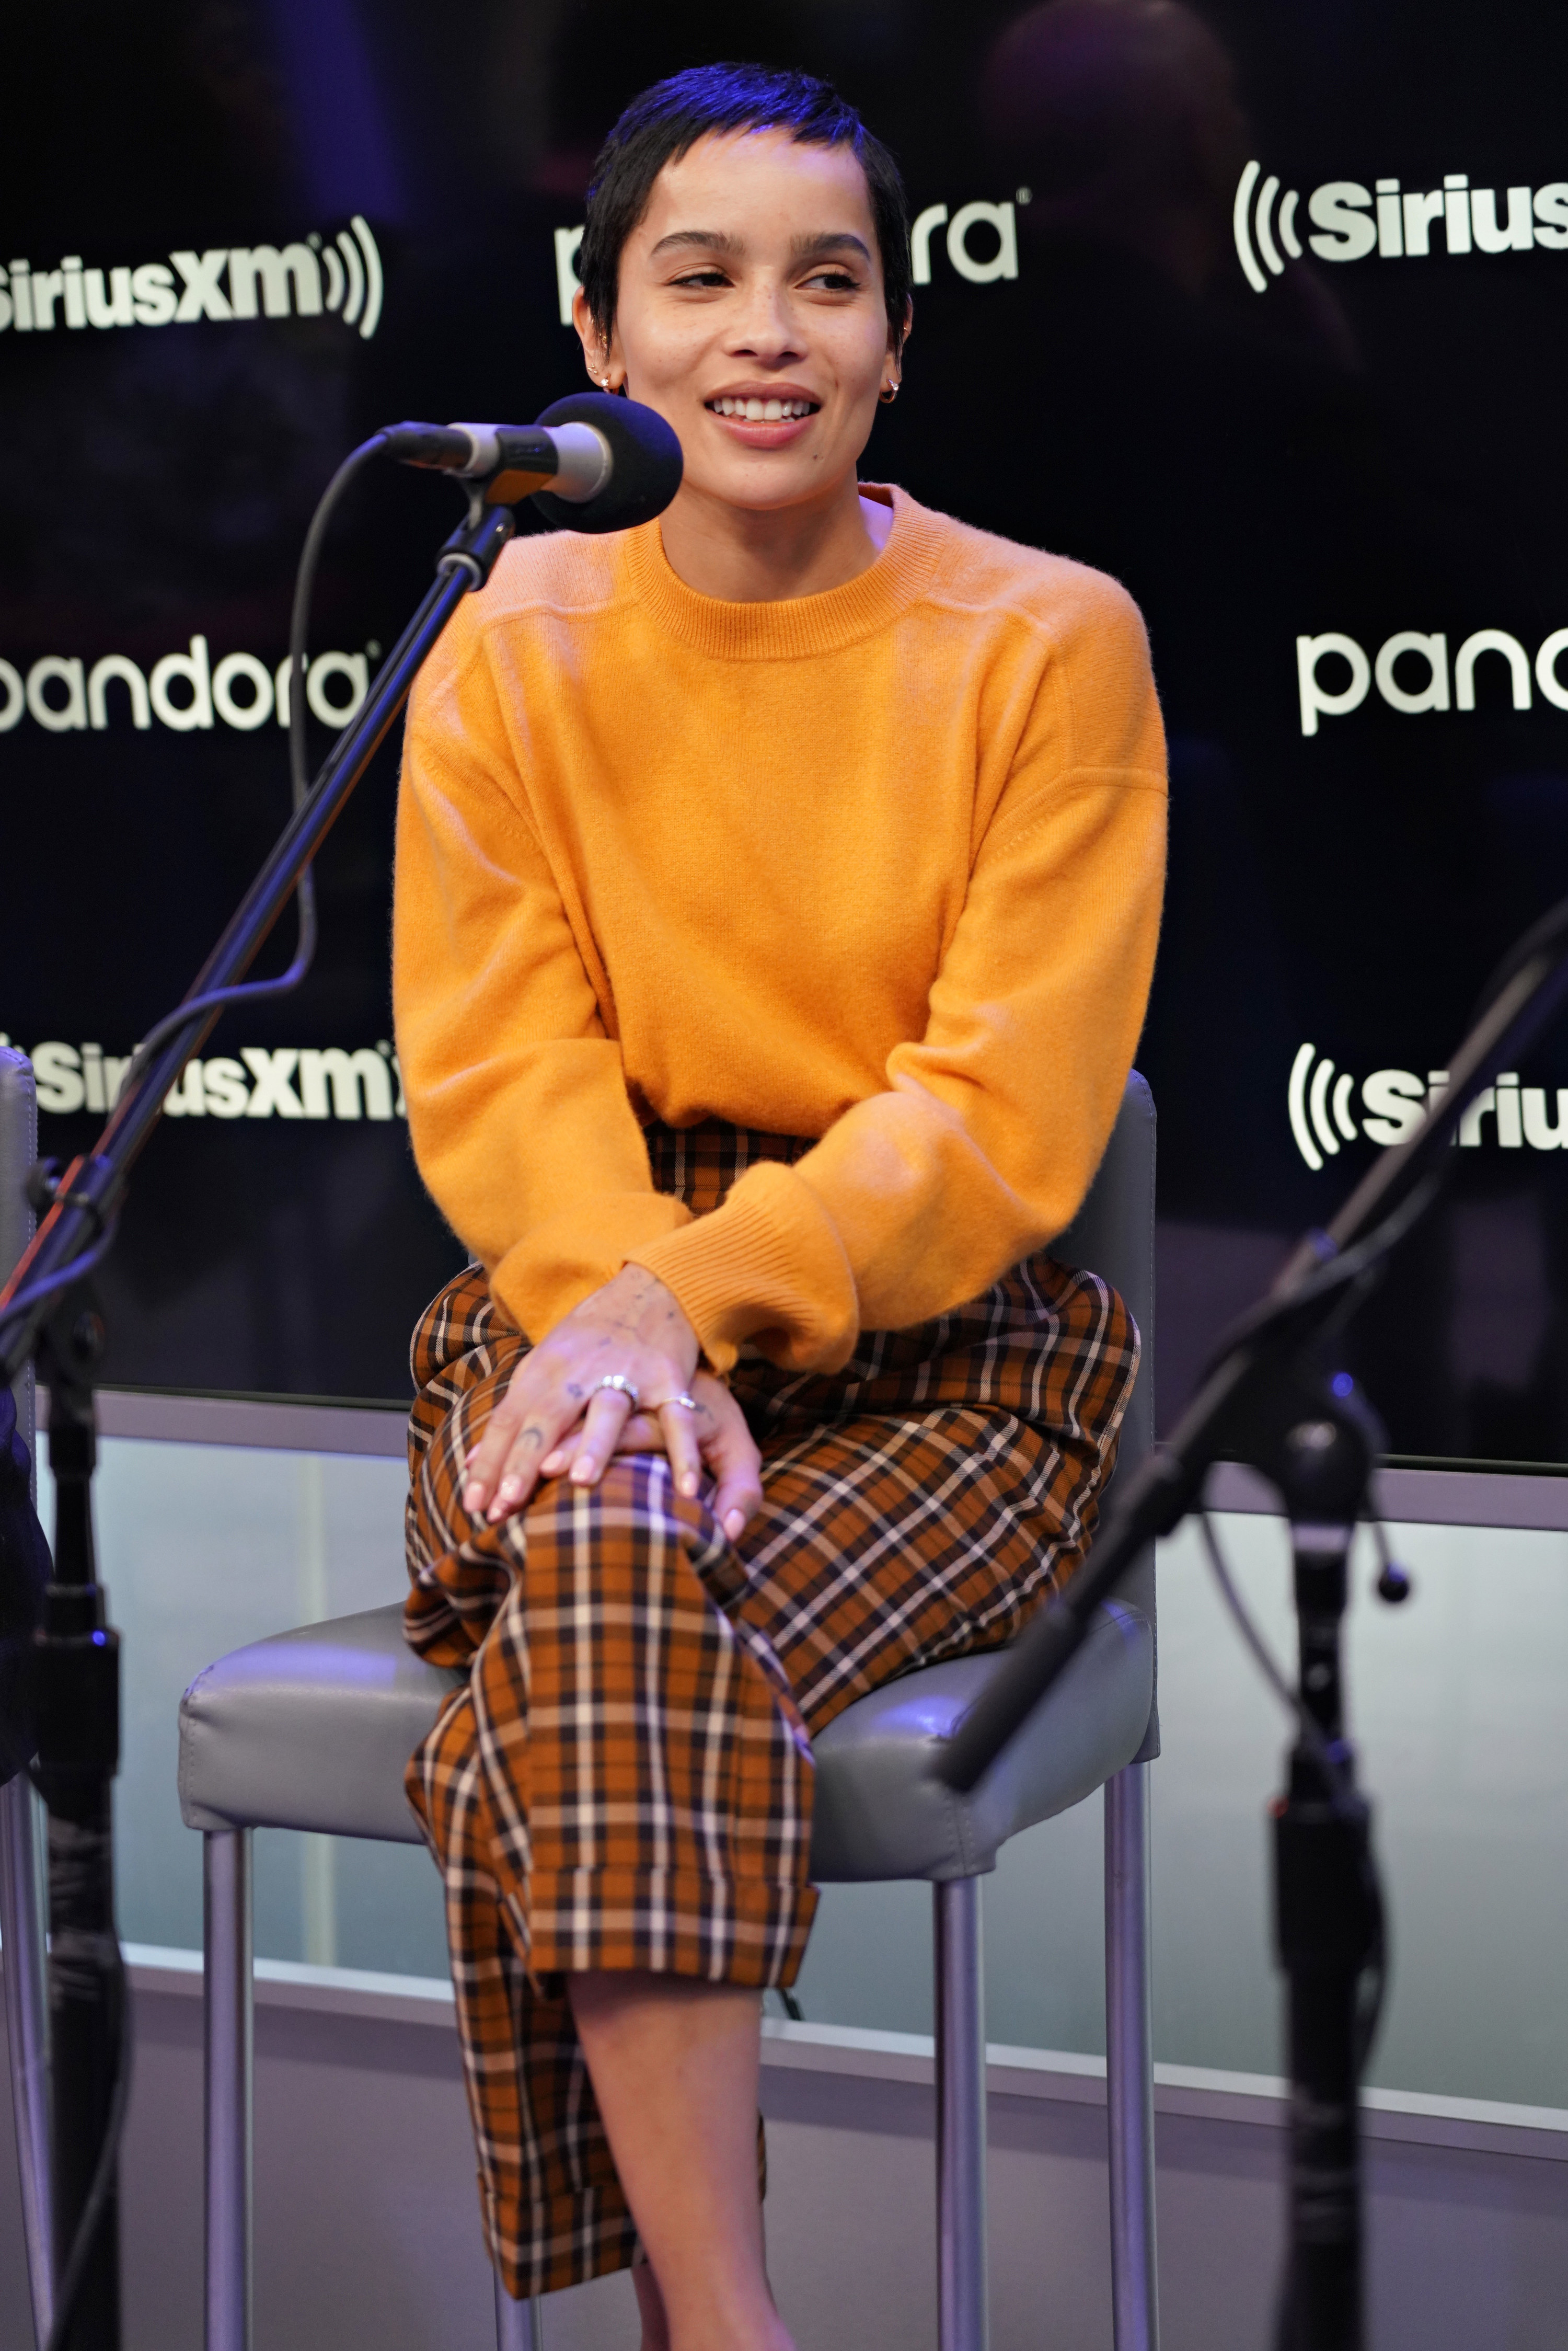 Zoë sitting in a tall chair during a radio interview